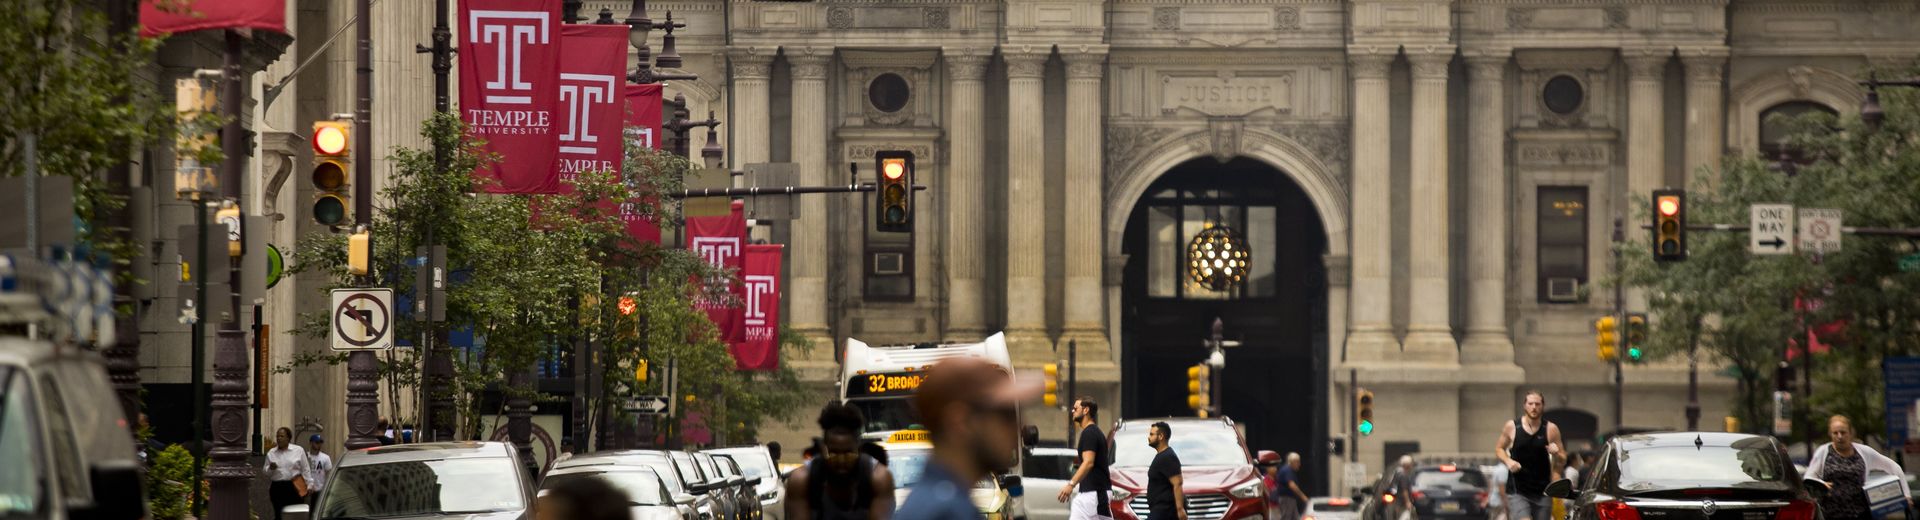 Temple University banners hang from street lamps, with Philadelphia's City Hall in the background.